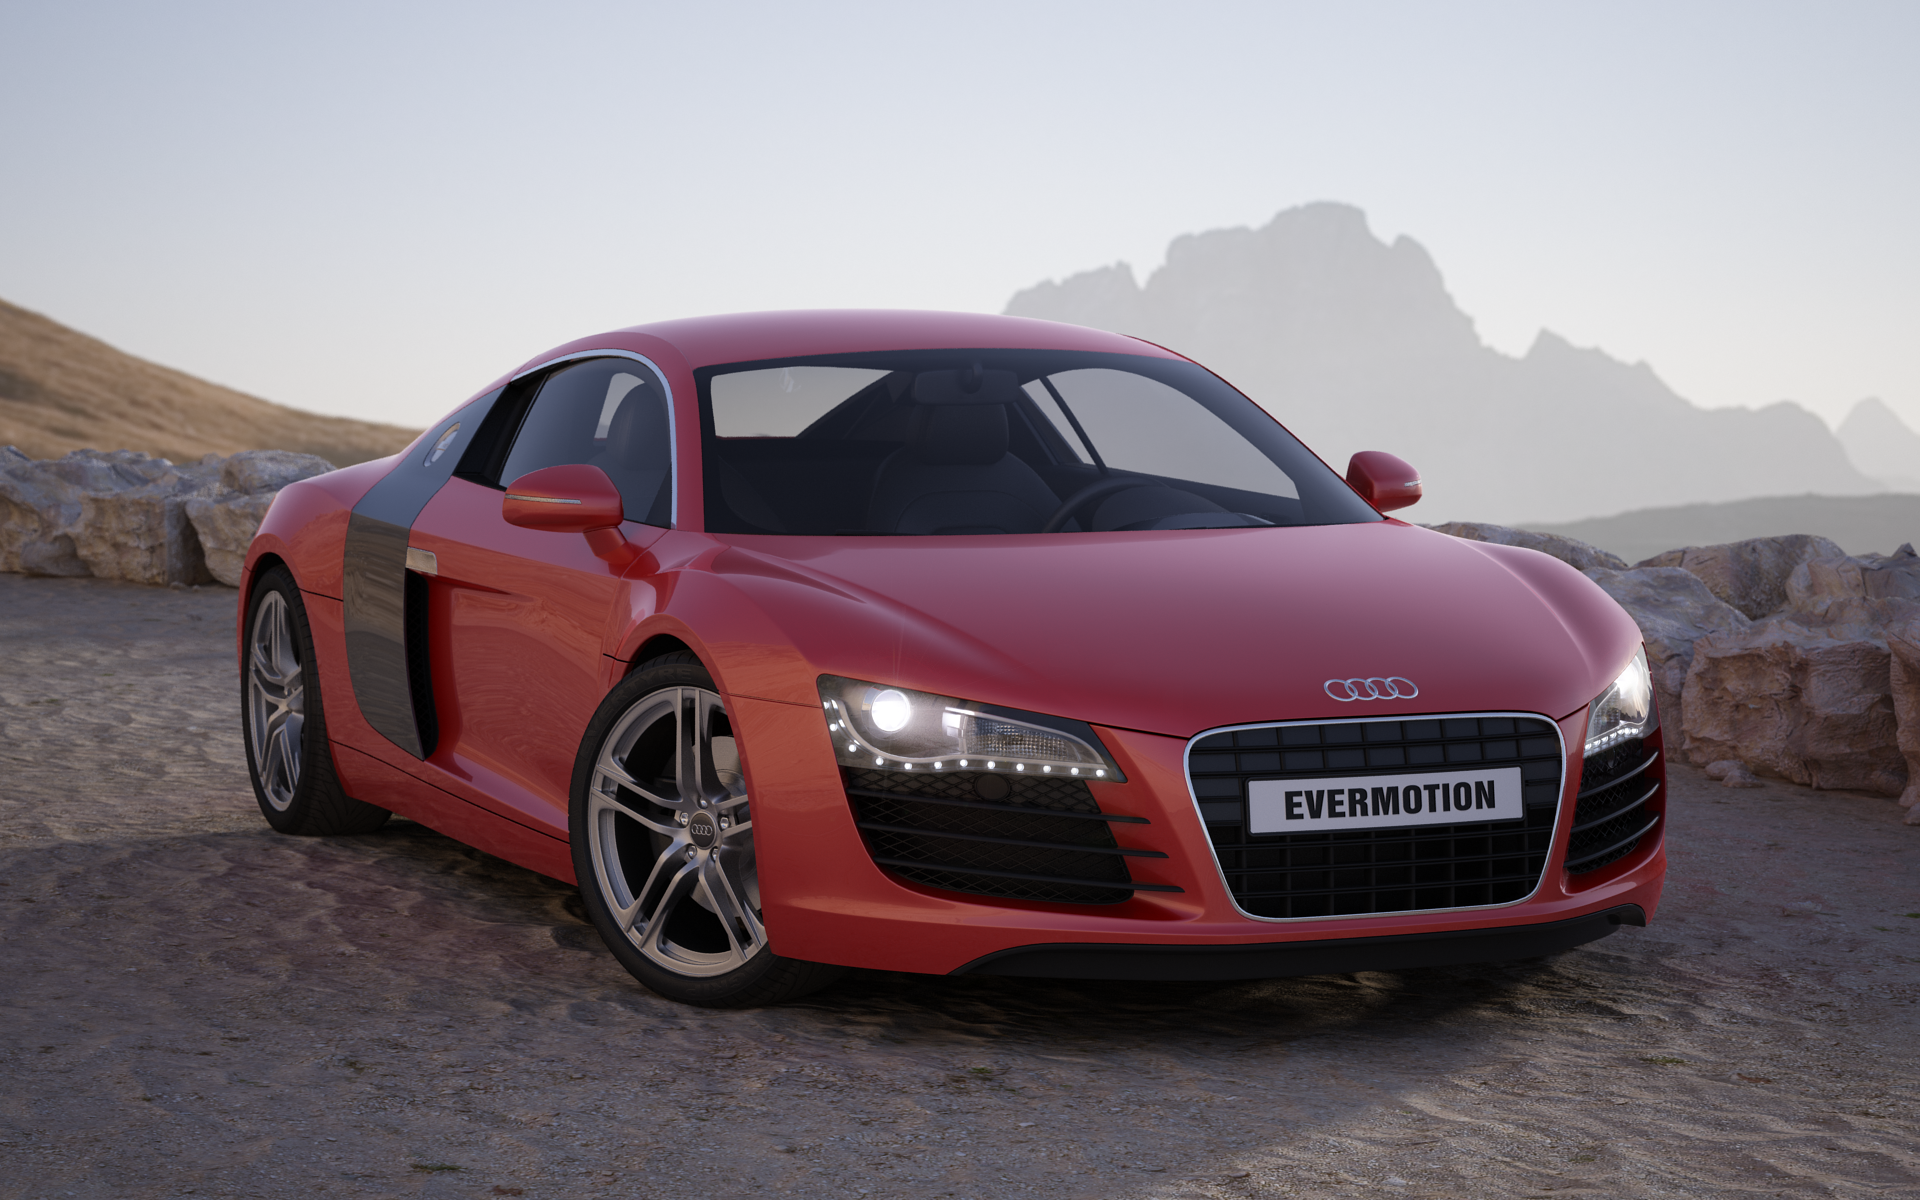 General 1920x1200 car evermotion Audi Audi R8 red cars vehicle German cars Volkswagen Group mid-engine